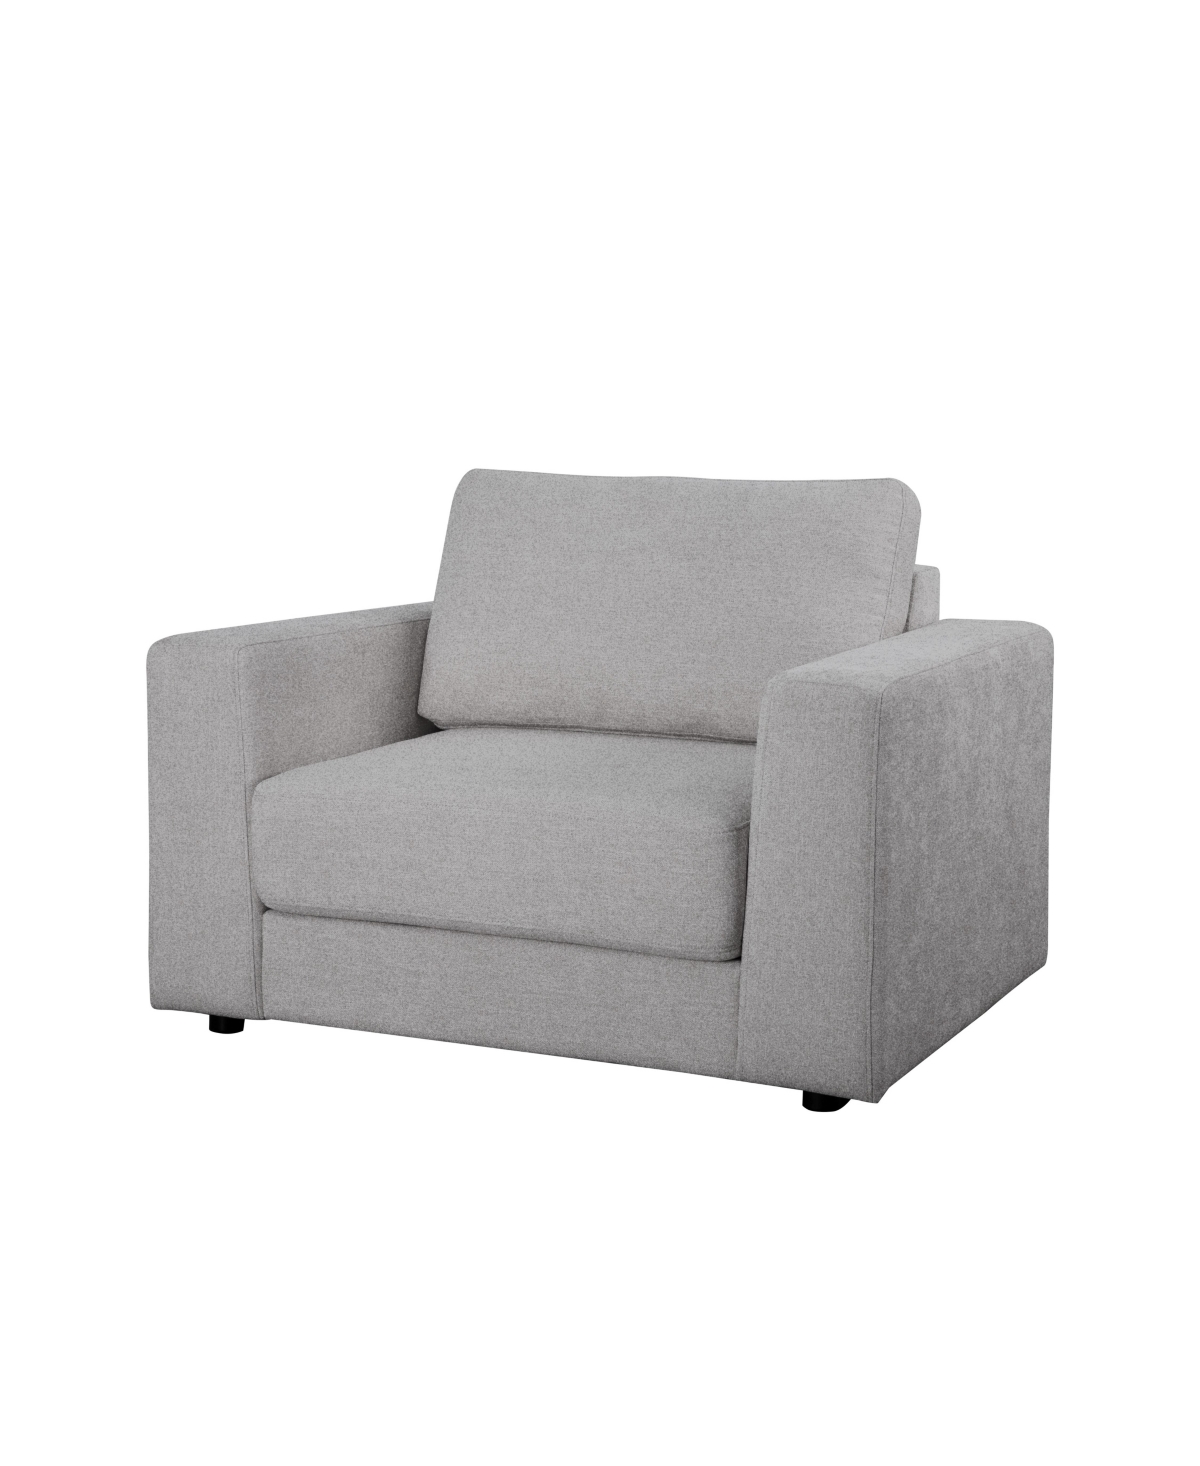 Abbyson Living Elizabeth 2 Piece Stain-resistant Fabric Oversized Armchair And Ottoman Set In Light Gray